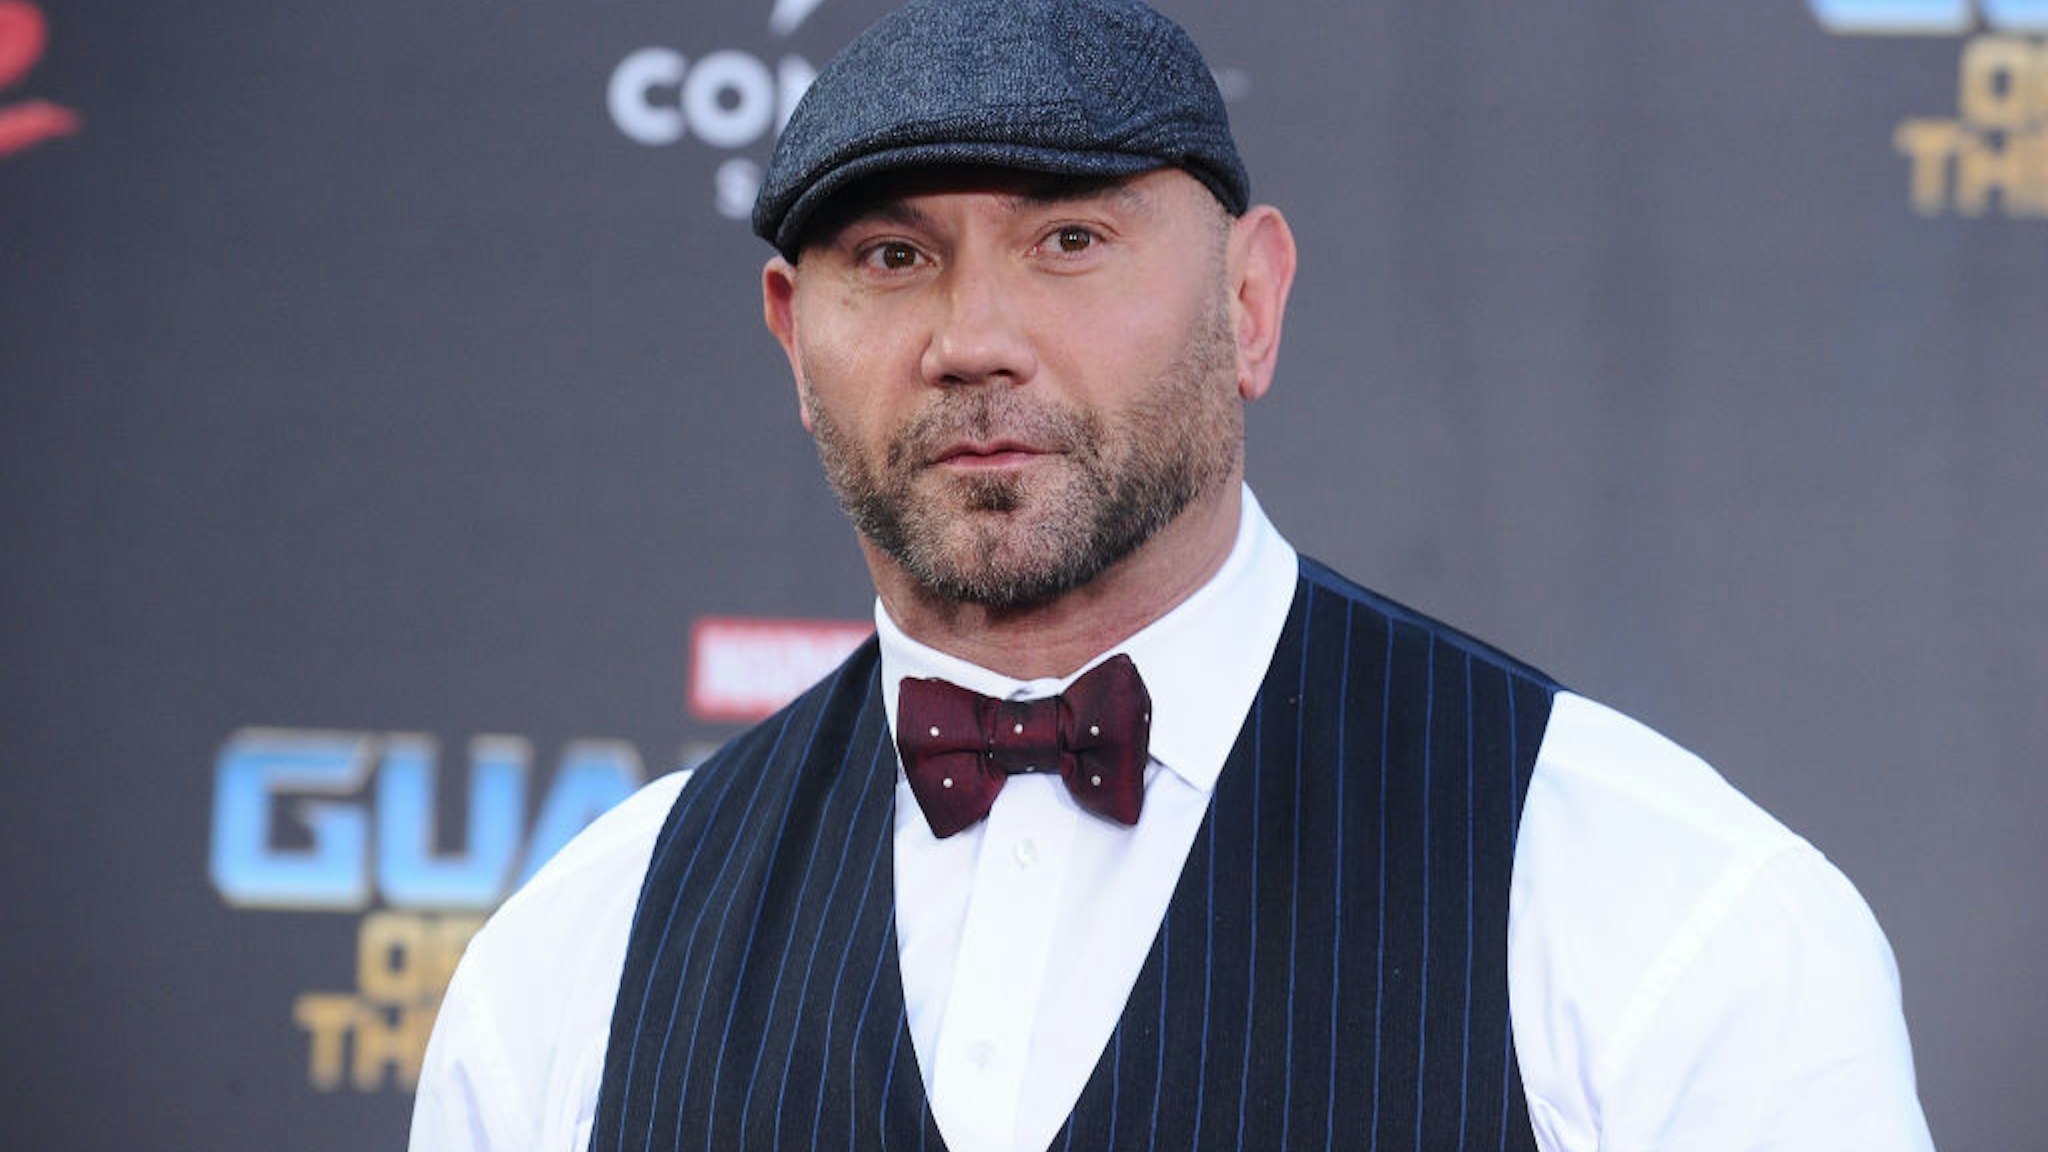 HOLLYWOOD, CA - APRIL 19: Actor Dave Bautista attends the premiere of "Guardians of the Galaxy Vol. 2" at Dolby Theatre on April 19, 2017 in Hollywood, California. (Photo by Jason LaVeris/FilmMagic)